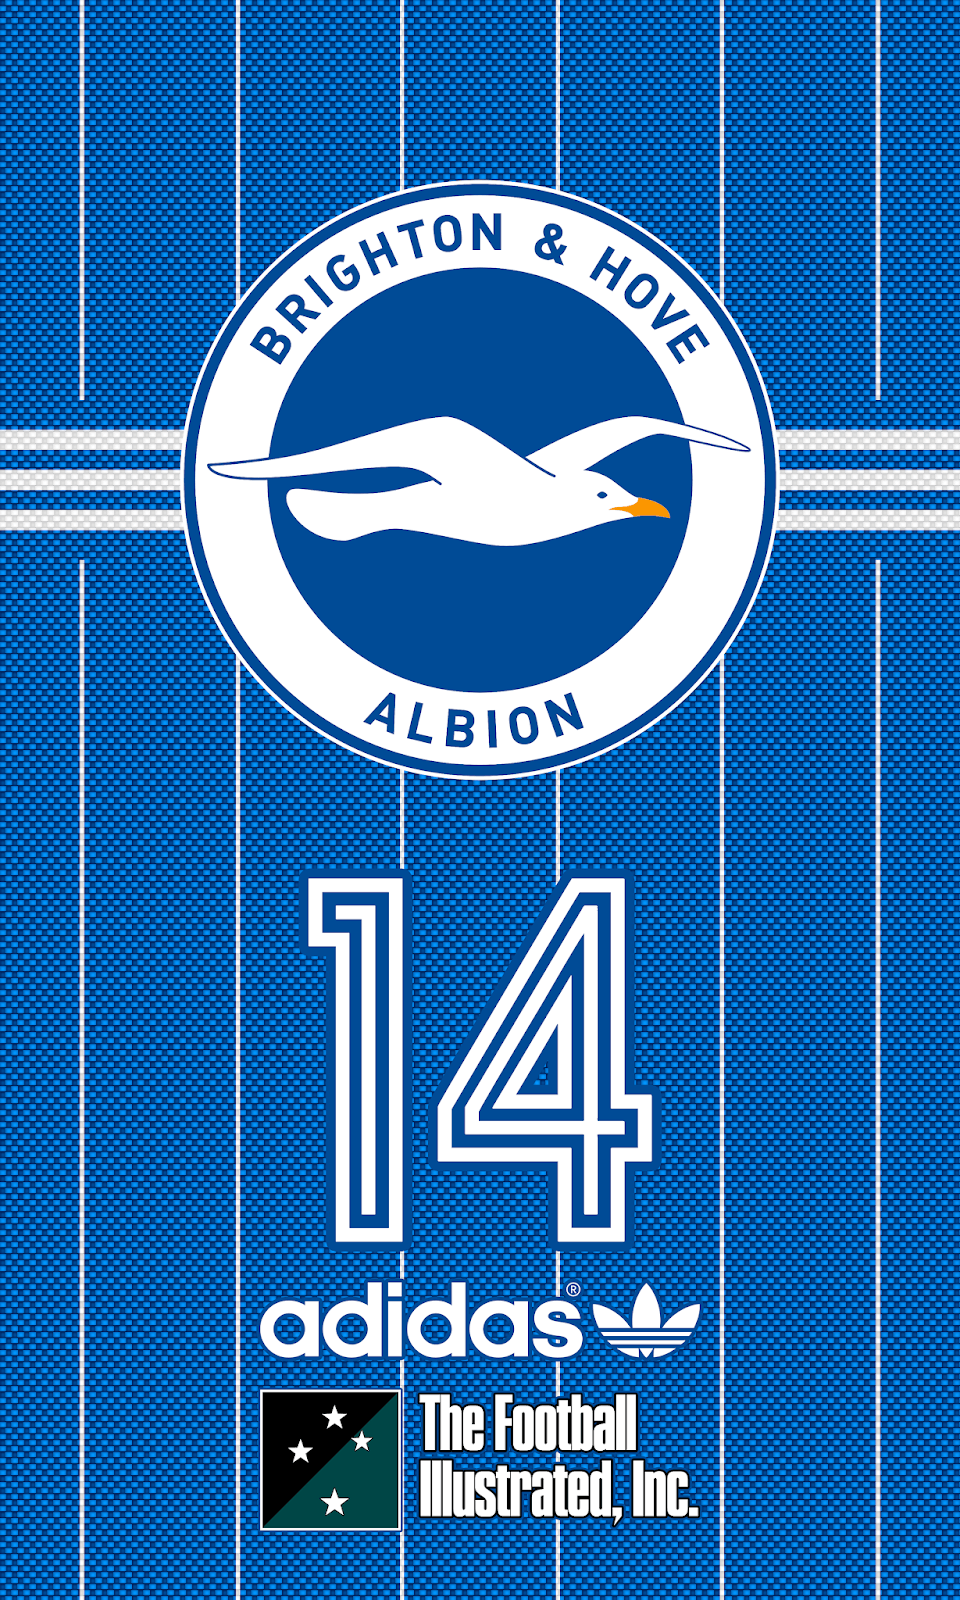 Wallpaper Brighton and Hove Albion FC. The Football Illustrated